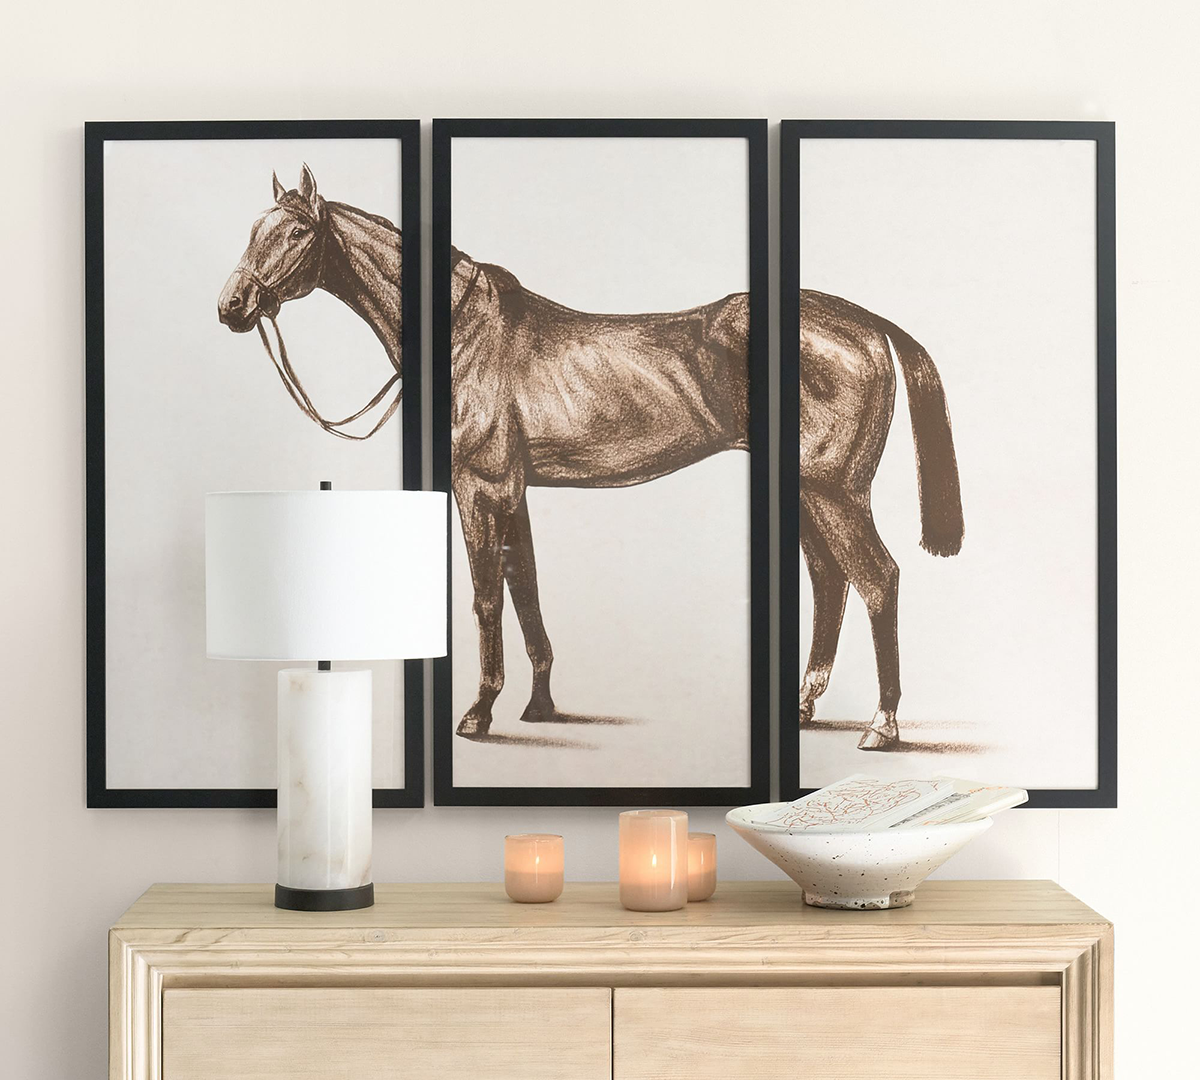 Horse triptych by The Artists Studio